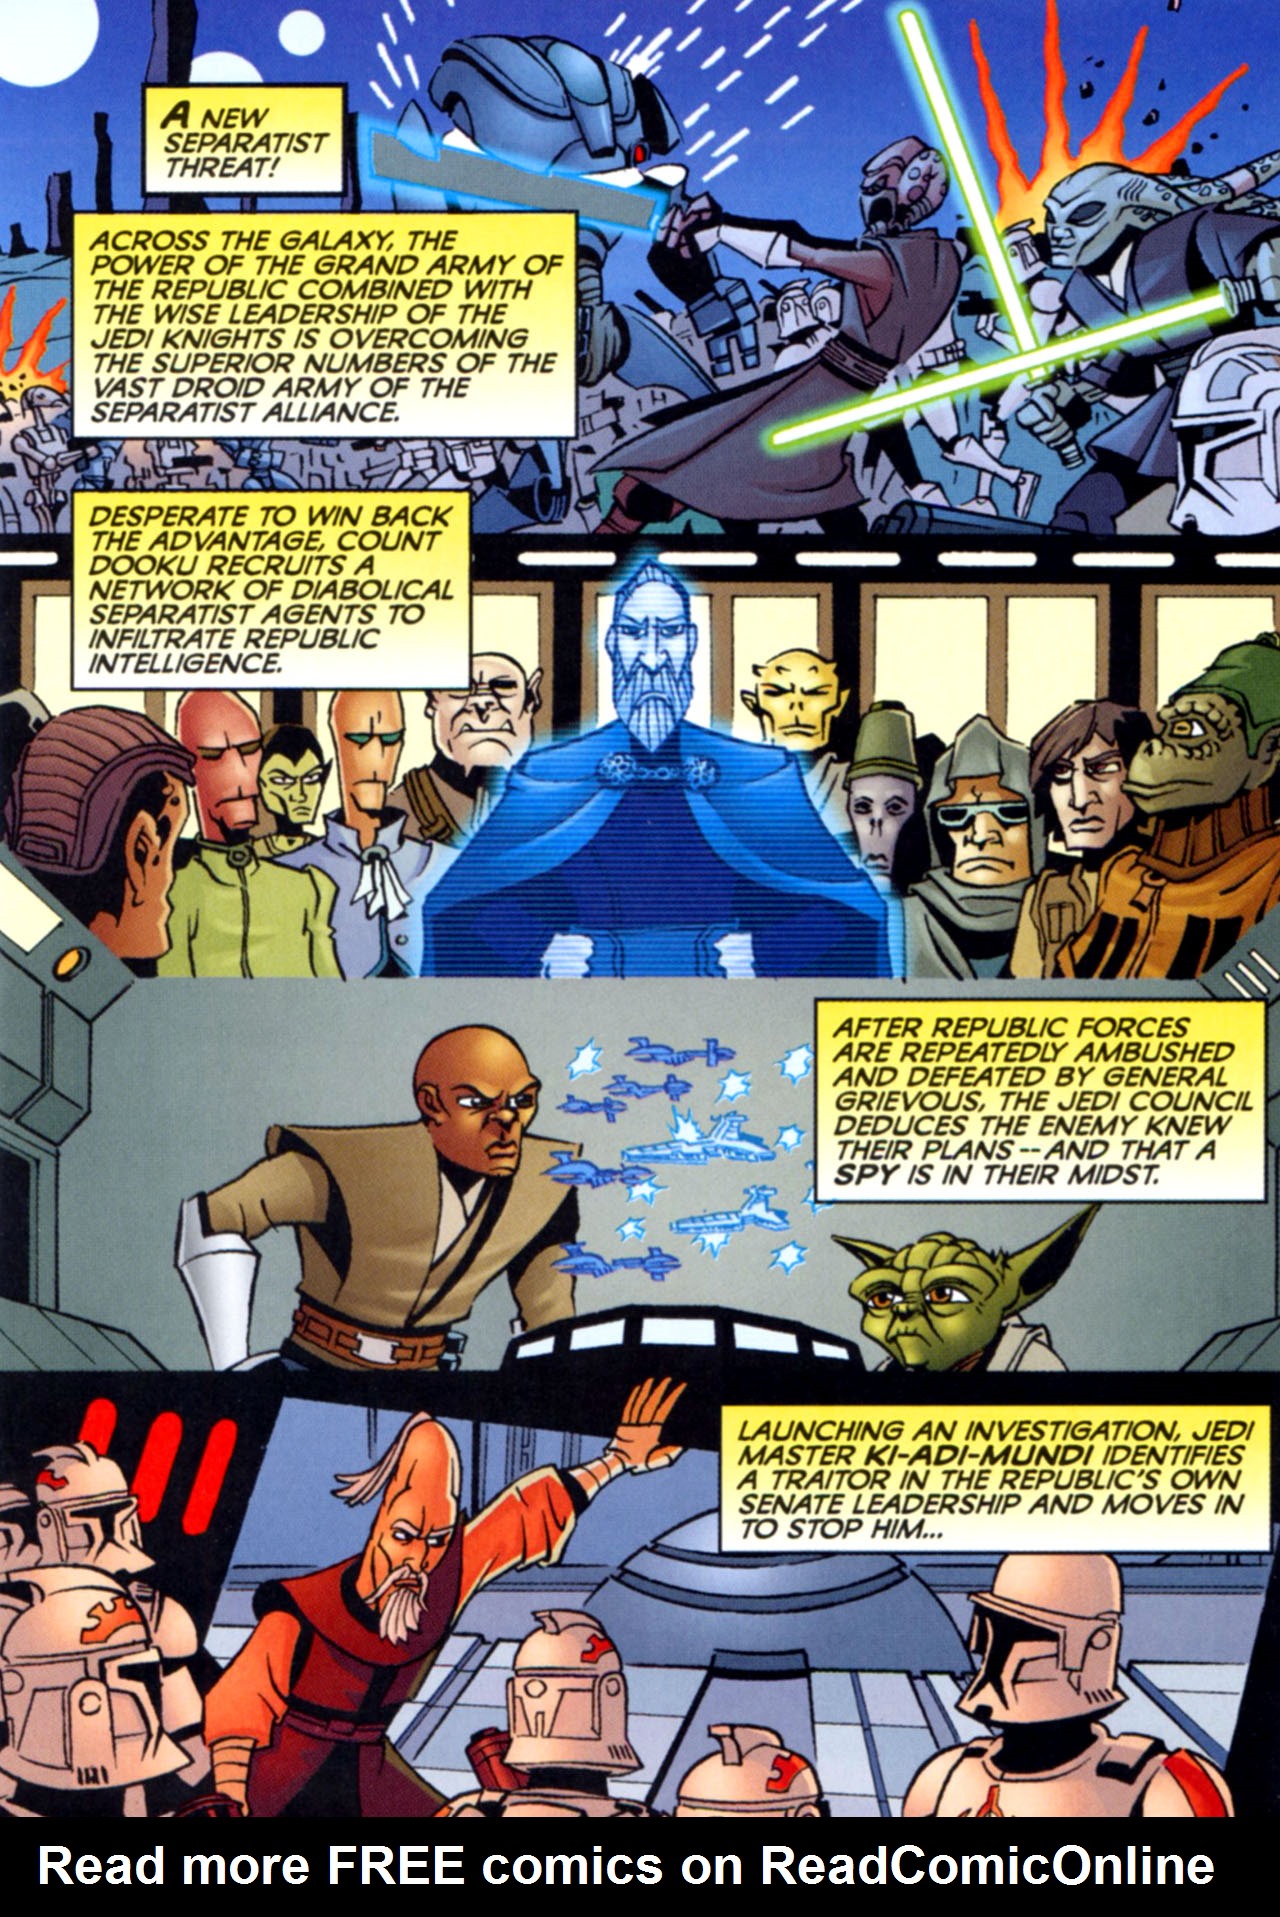 Read online Star Wars: The Clone Wars - Crash Course comic -  Issue # Full - 6